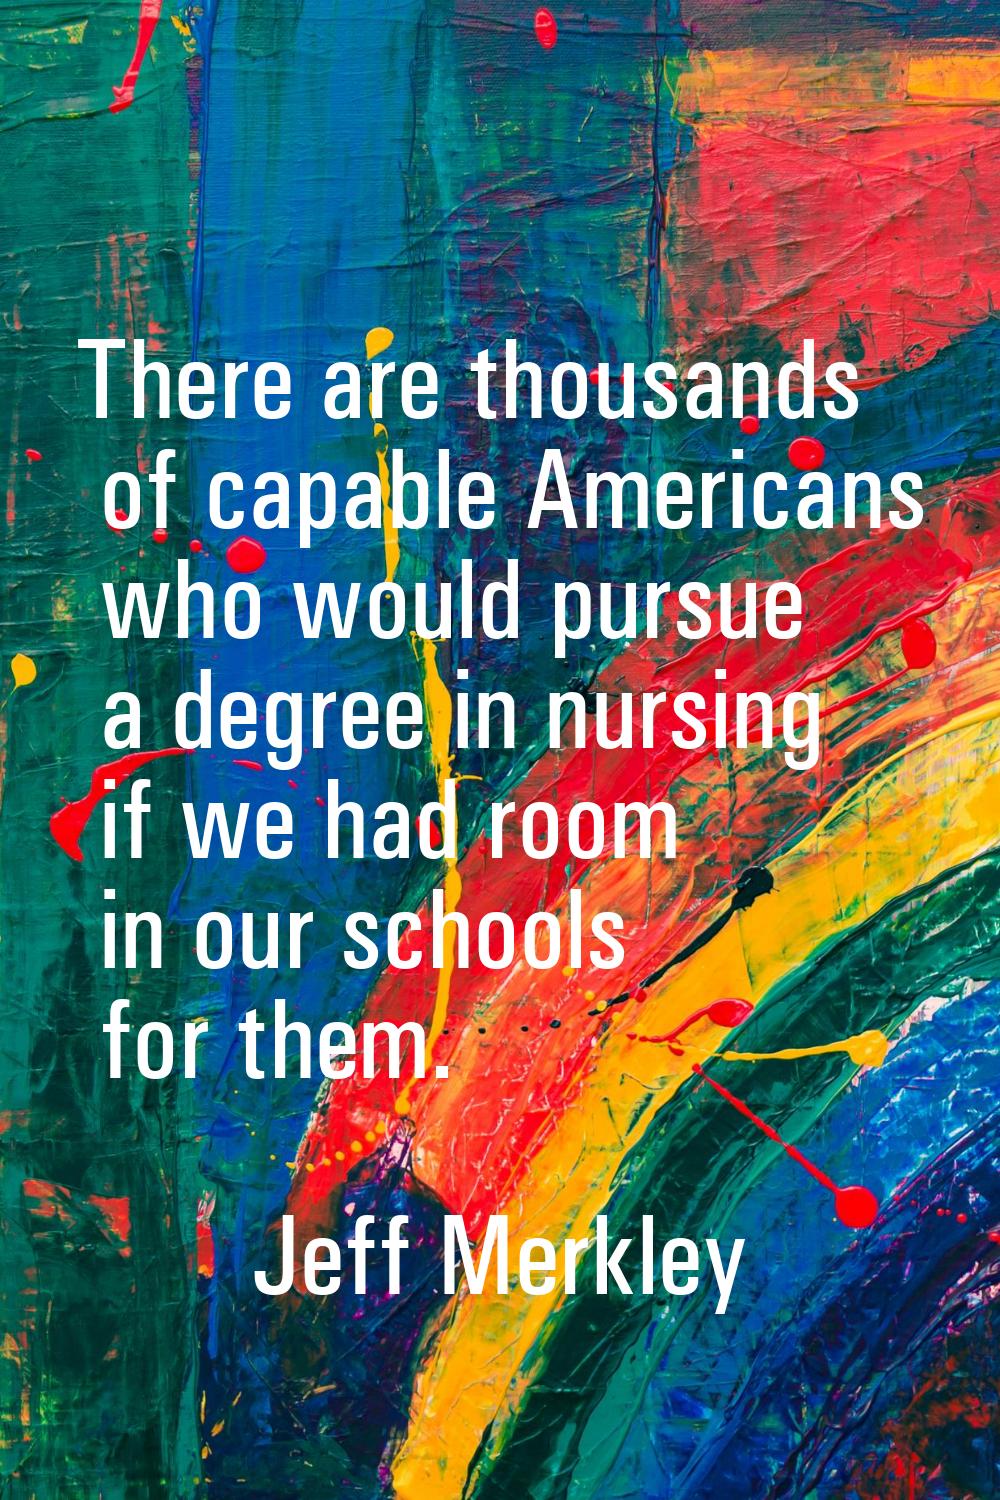 There are thousands of capable Americans who would pursue a degree in nursing if we had room in our